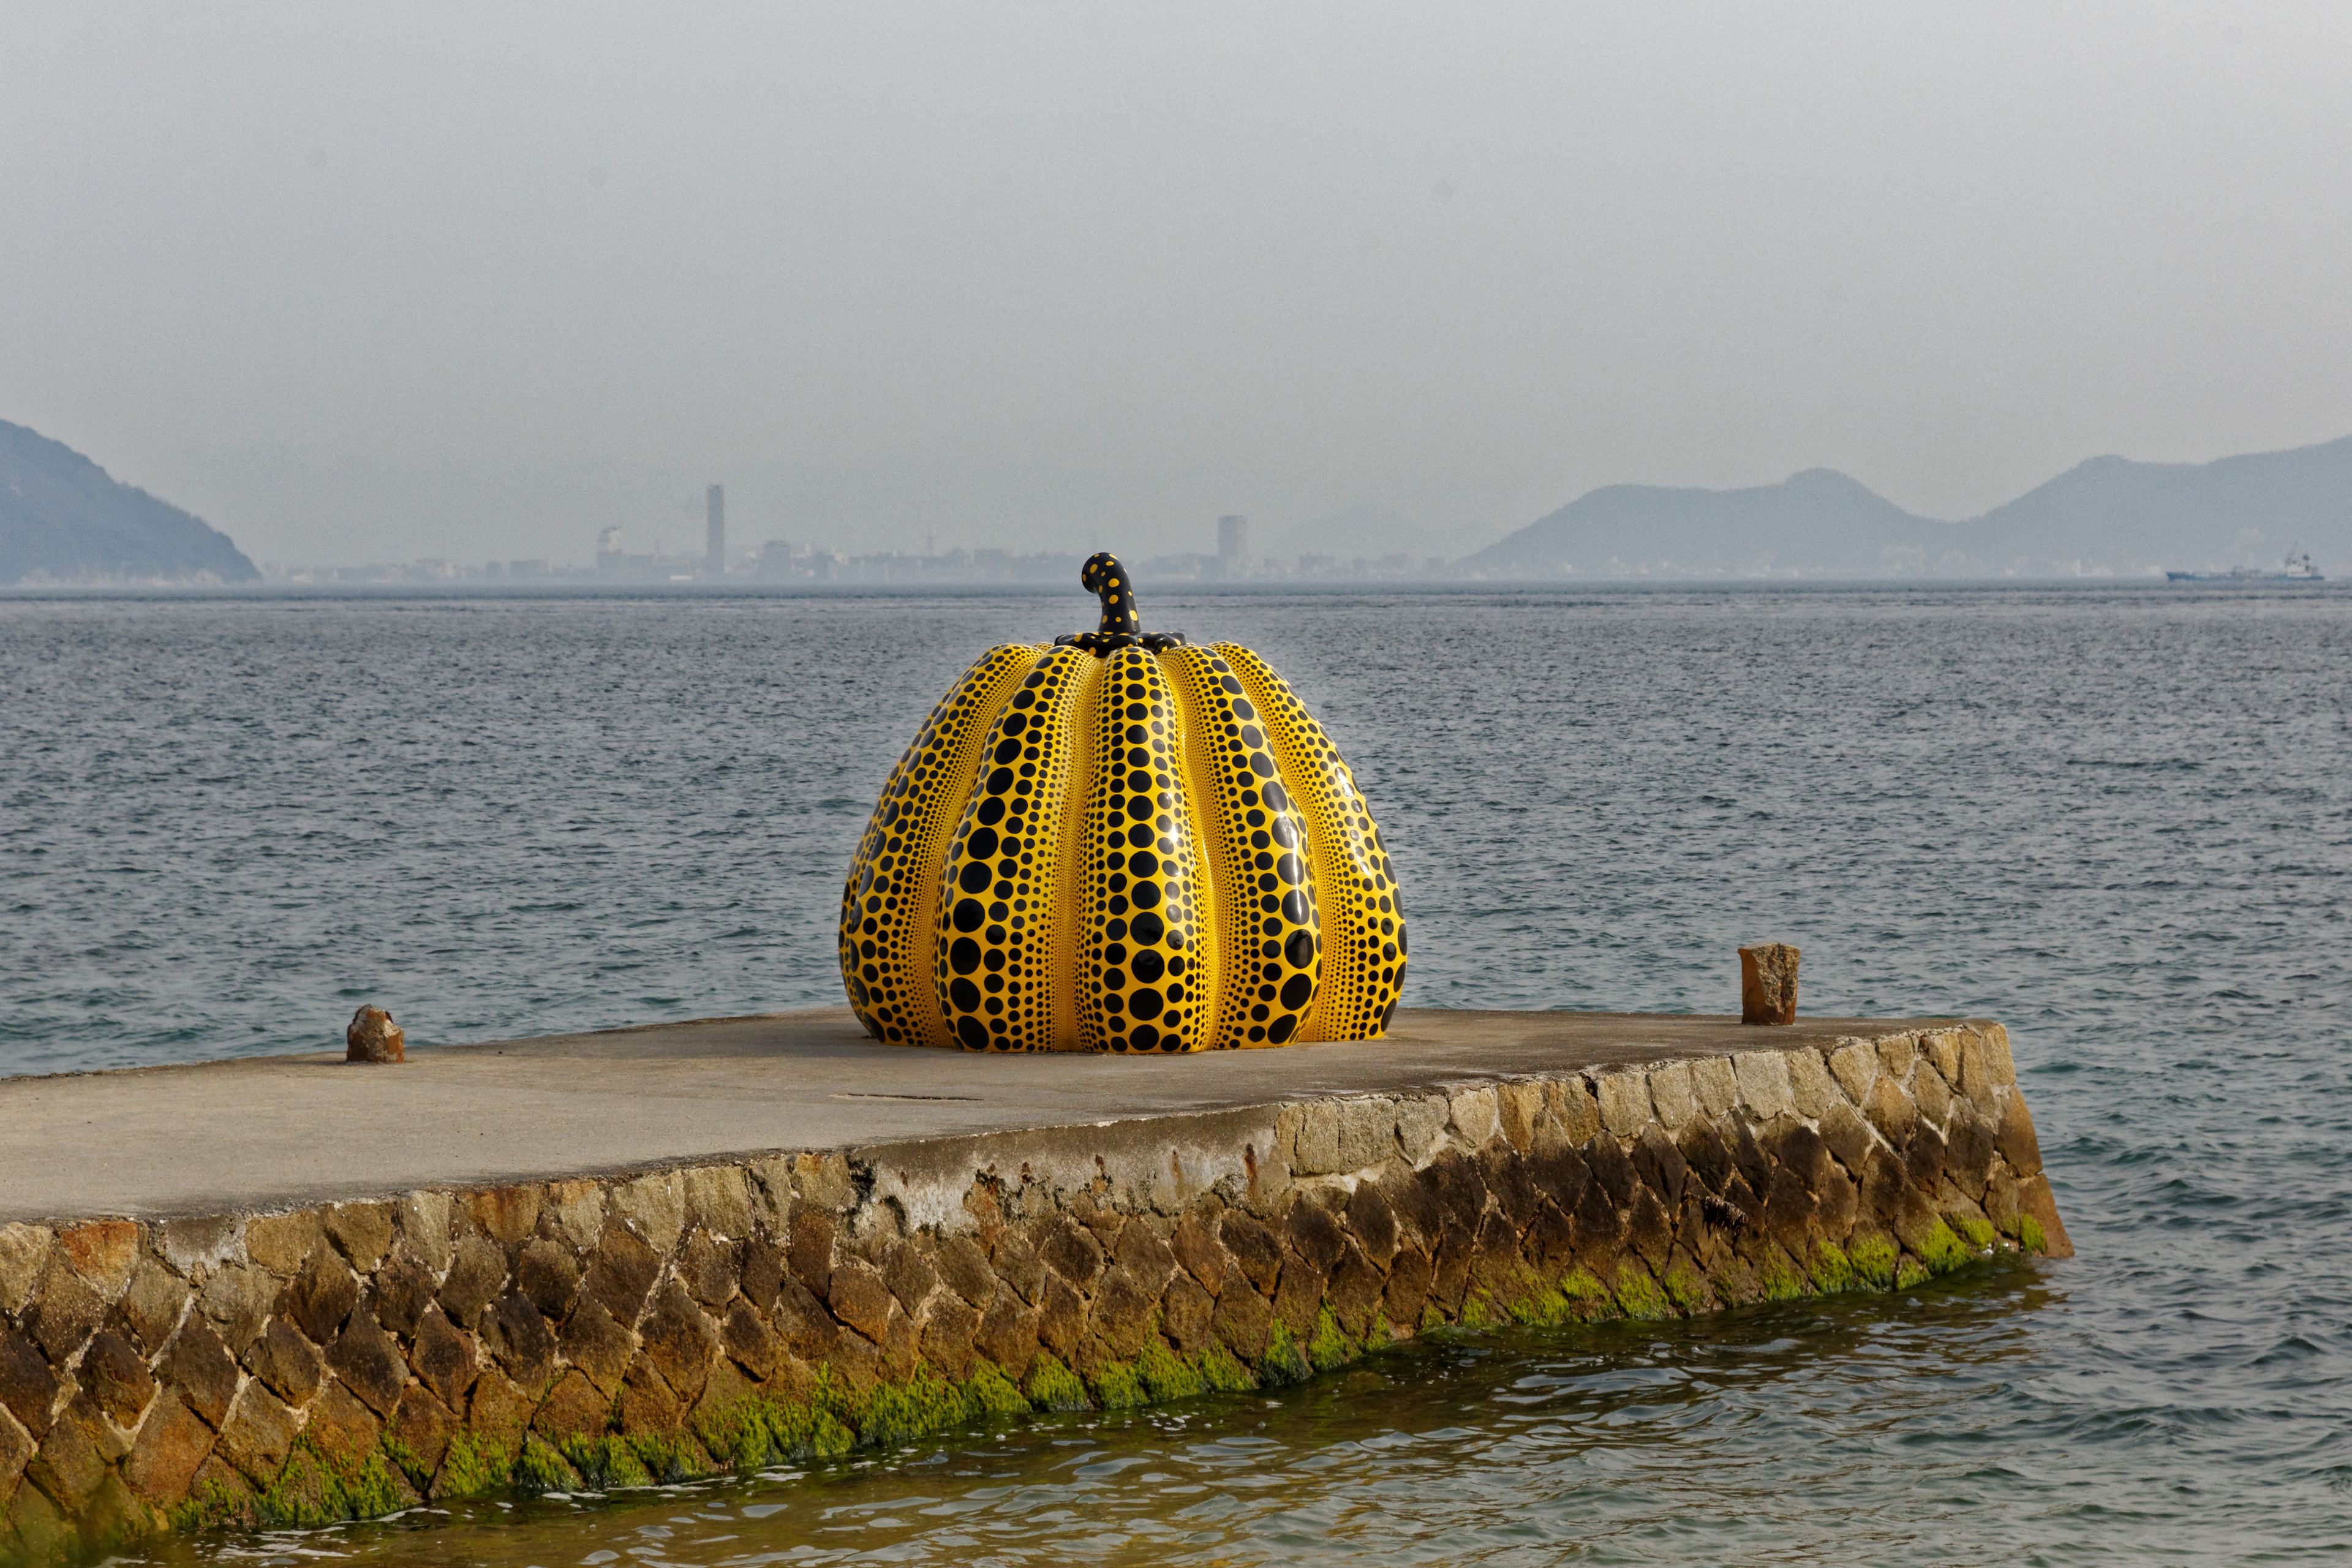 One of Yayoi Kusama's giant pumpkin sculptures is depicted against a harbour scene.